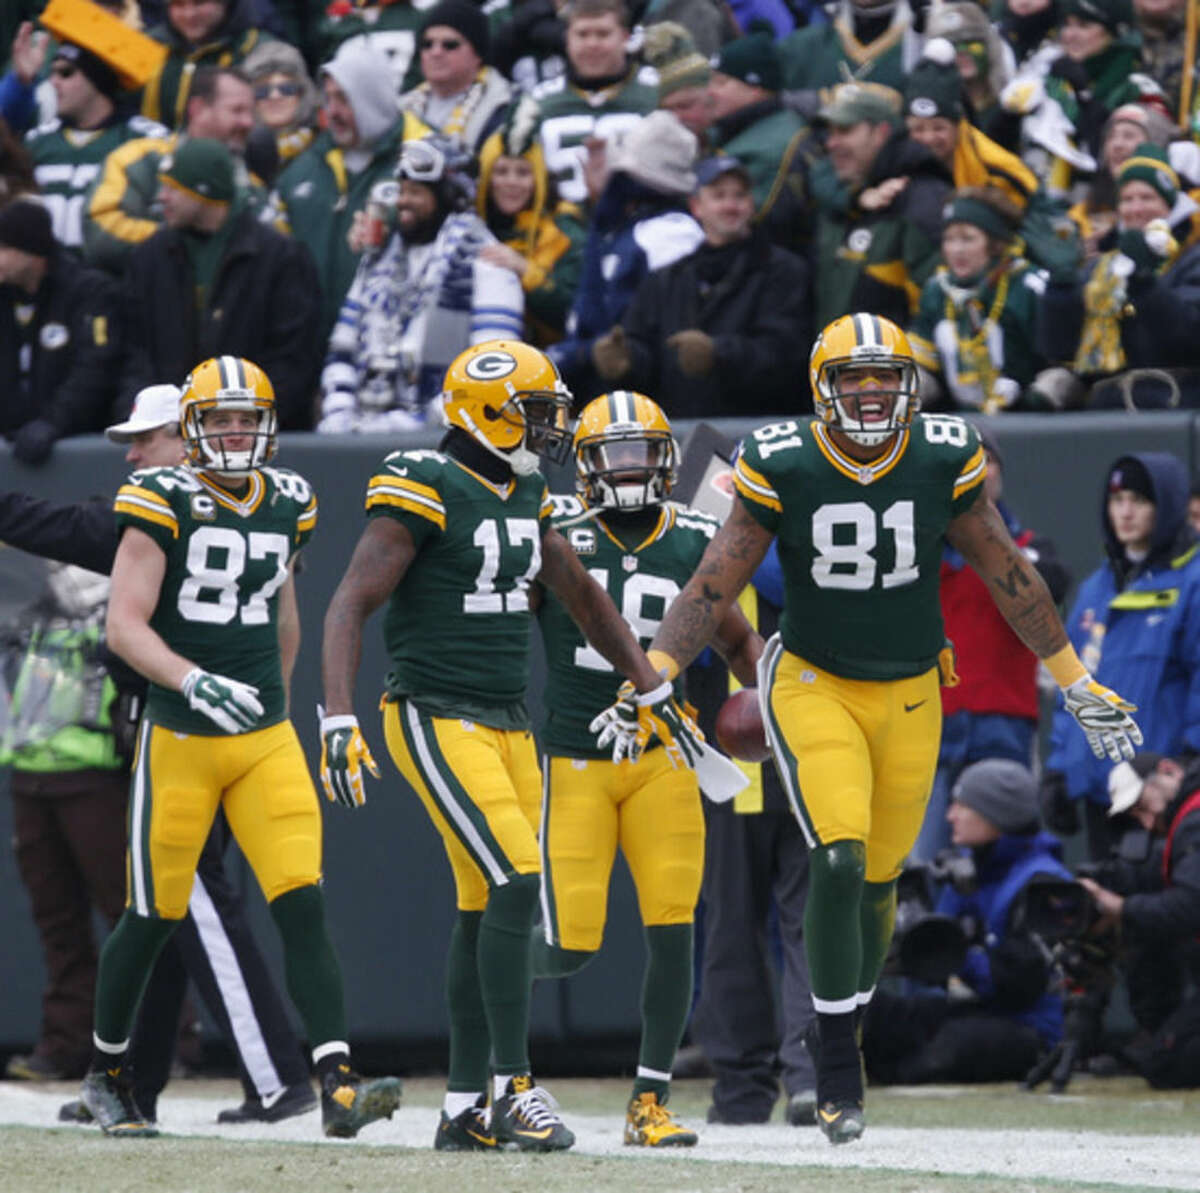 Green Bay Packers tight end Andrew Quarless (81) celebrates a touchdown during the first half of an NFL divisional playoff football game against the Dallas Cowboys Sunday, Jan. 11, 2015, in Green Bay, Wis. (AP Photo/Mike Roemer)